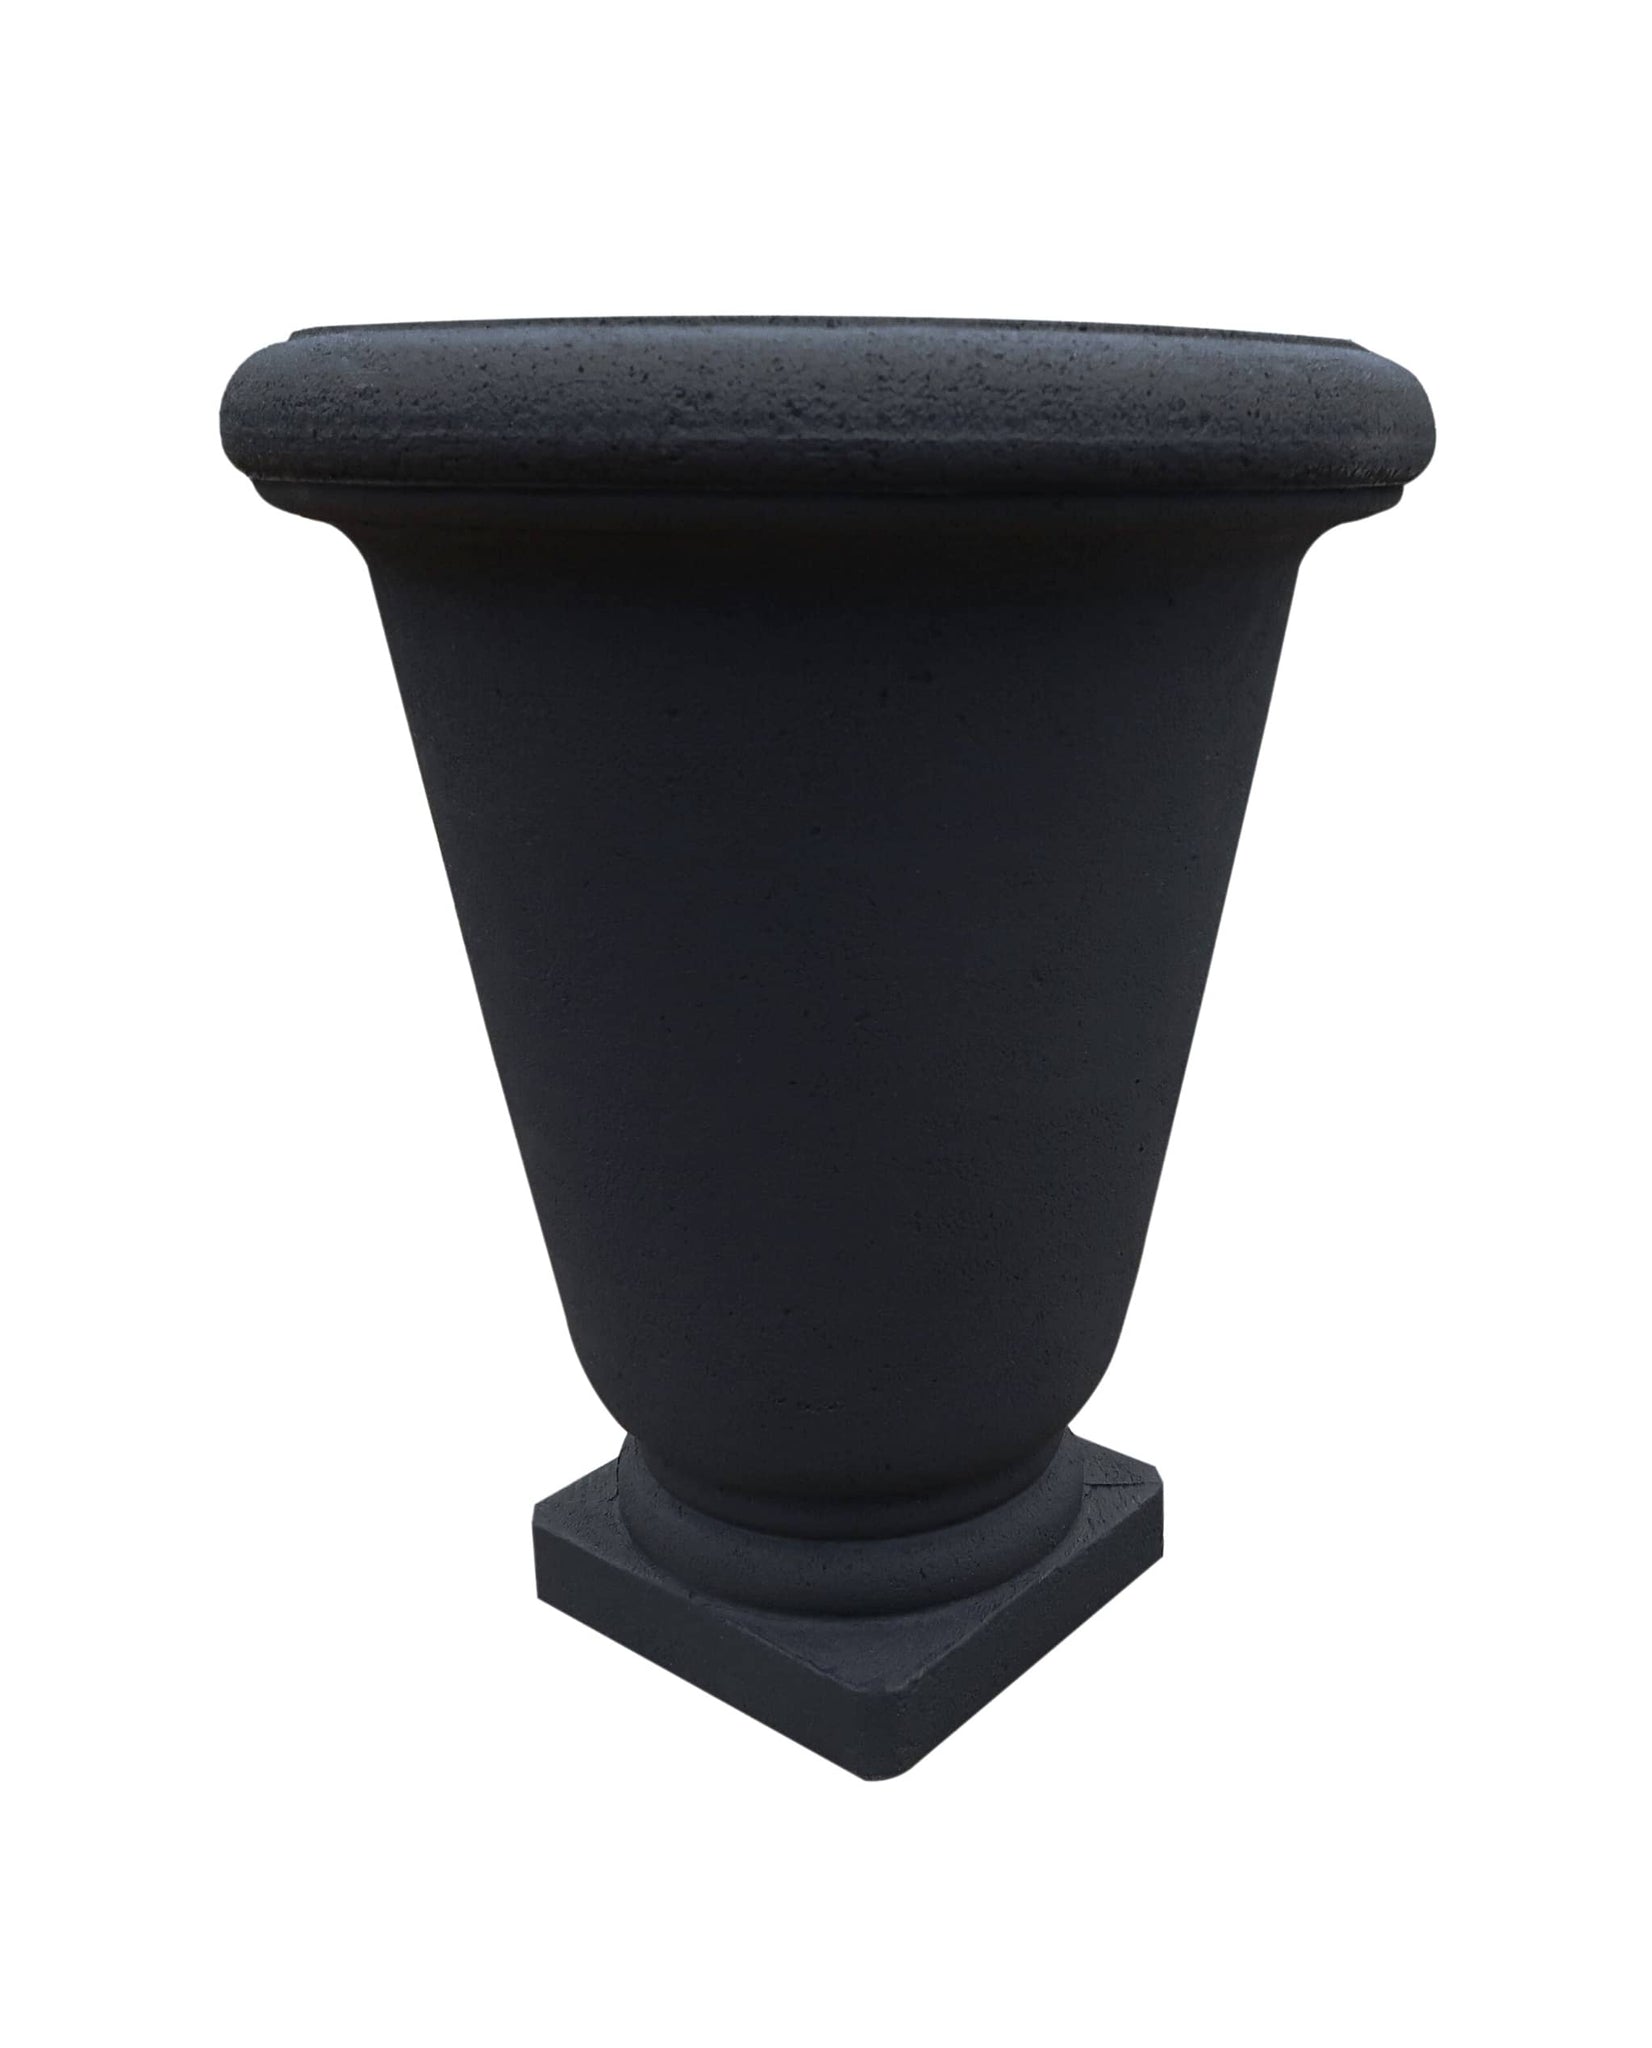 Classic style Japi Bell Urn in the colour Lead